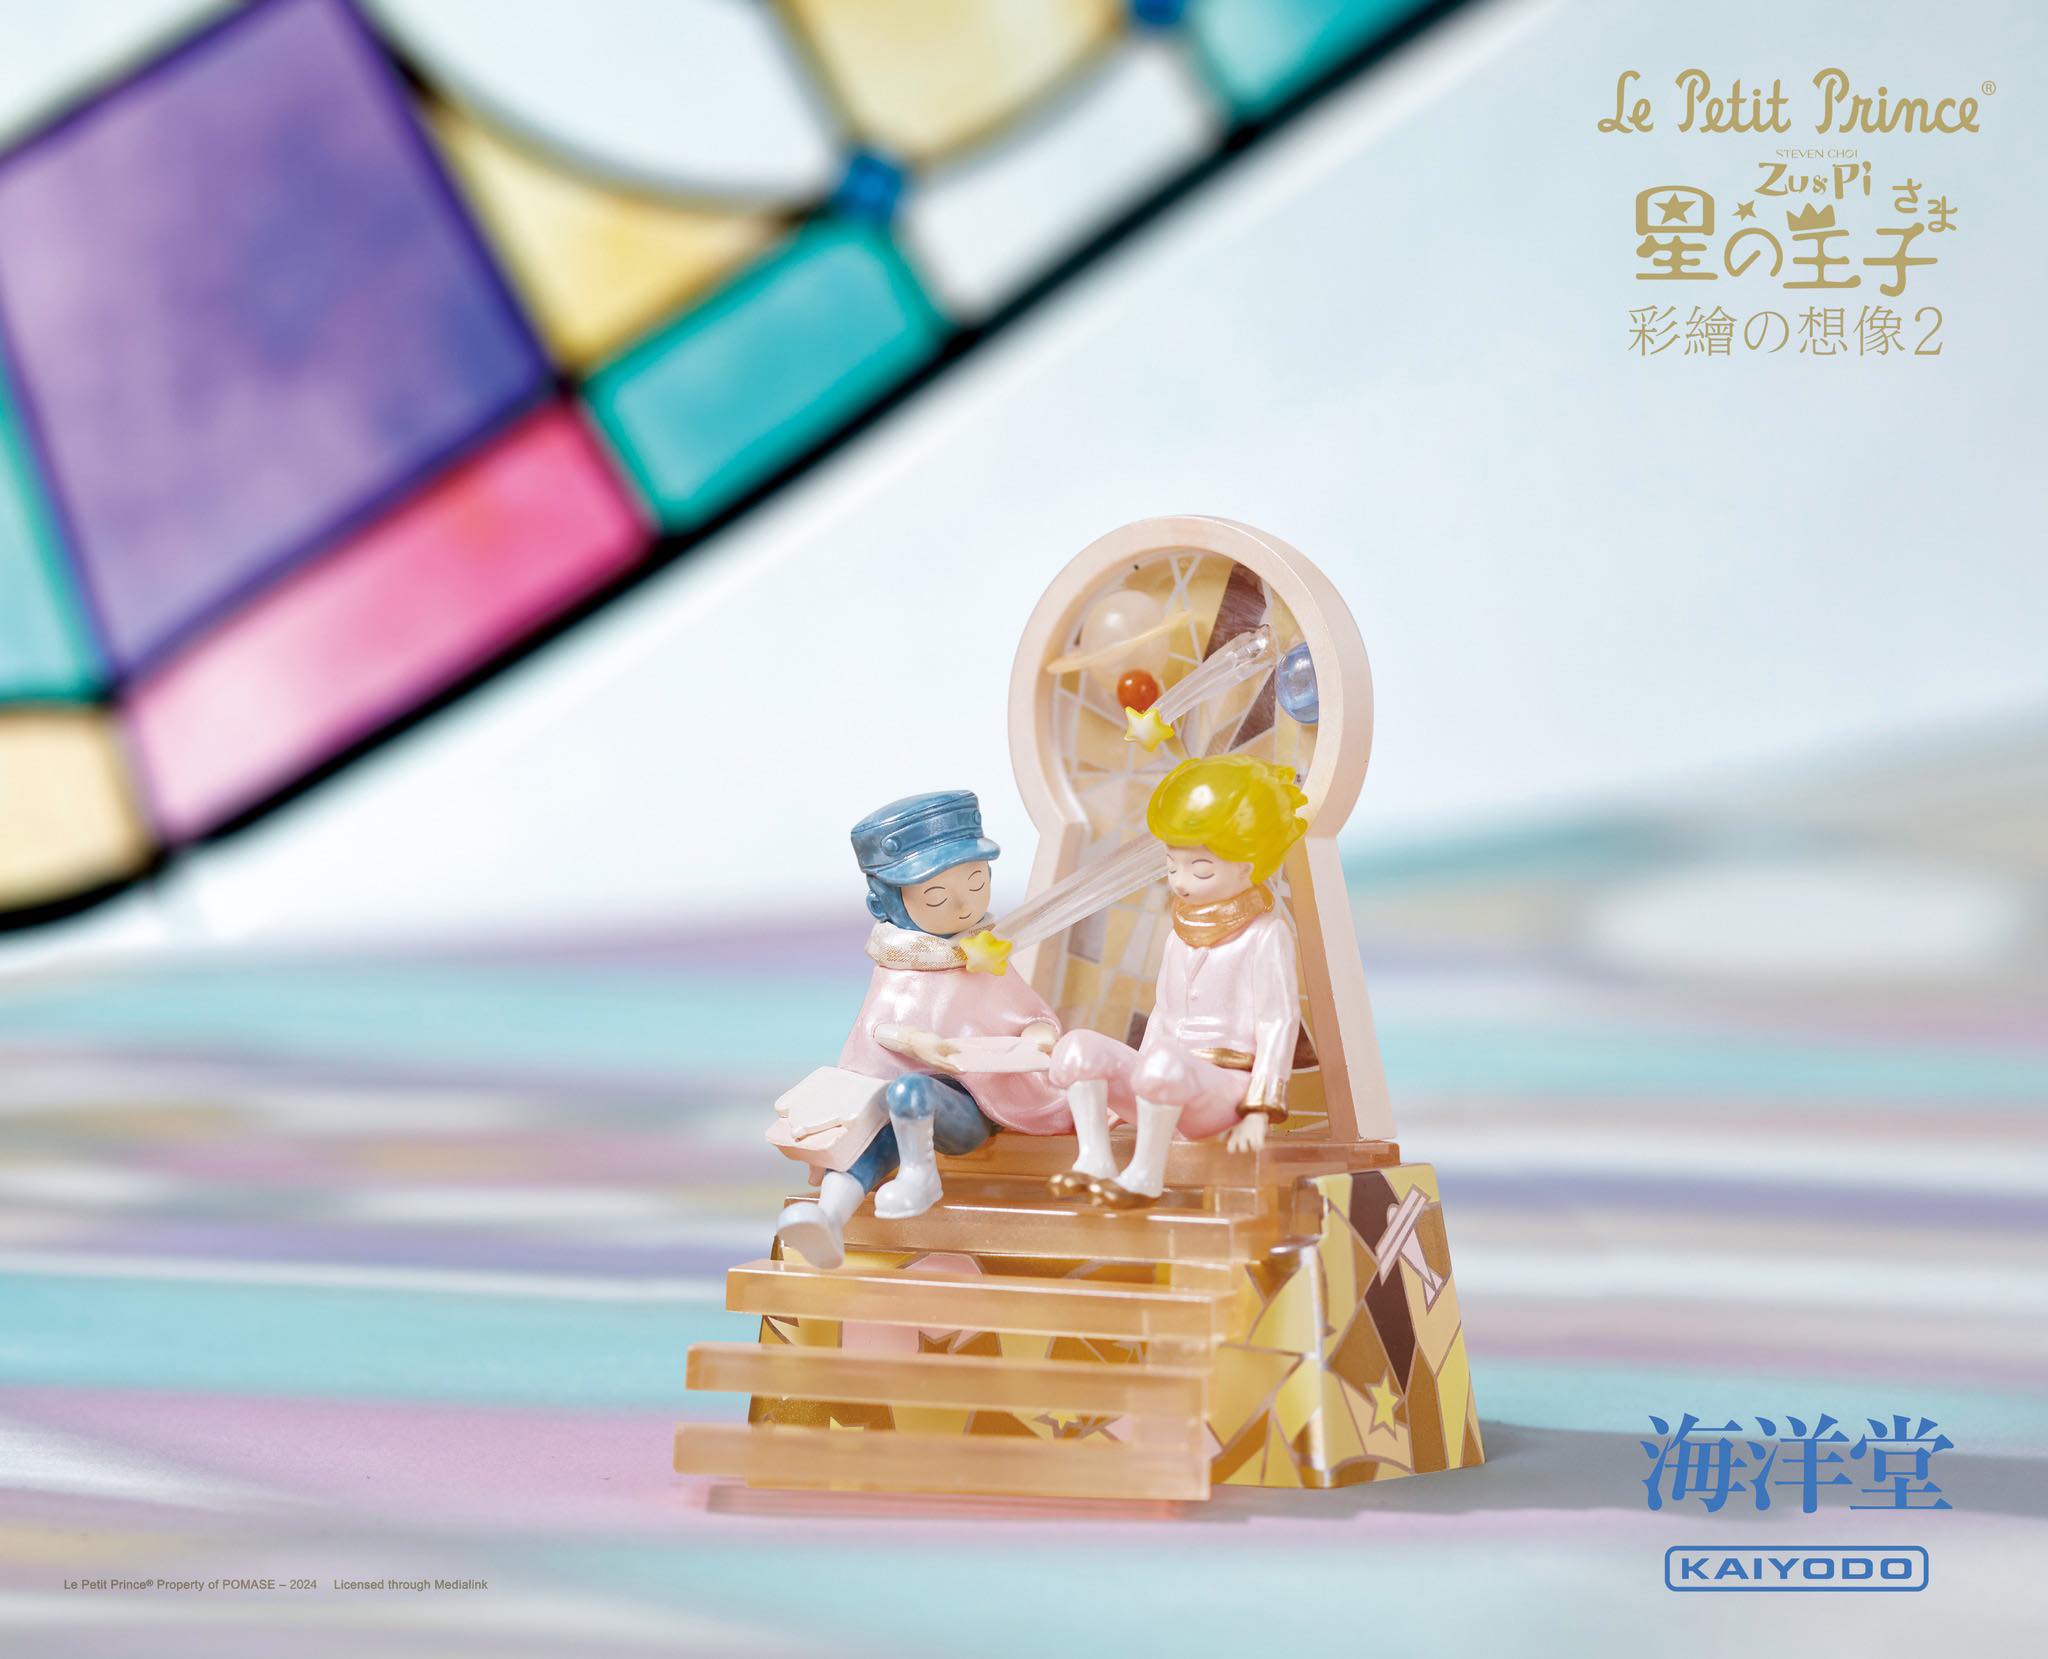 A blind box toy figurine of The Little Prince Vol. 4 - Stained Glass Special Edition by Zu & Pi, featuring a boy and girl on a bench.